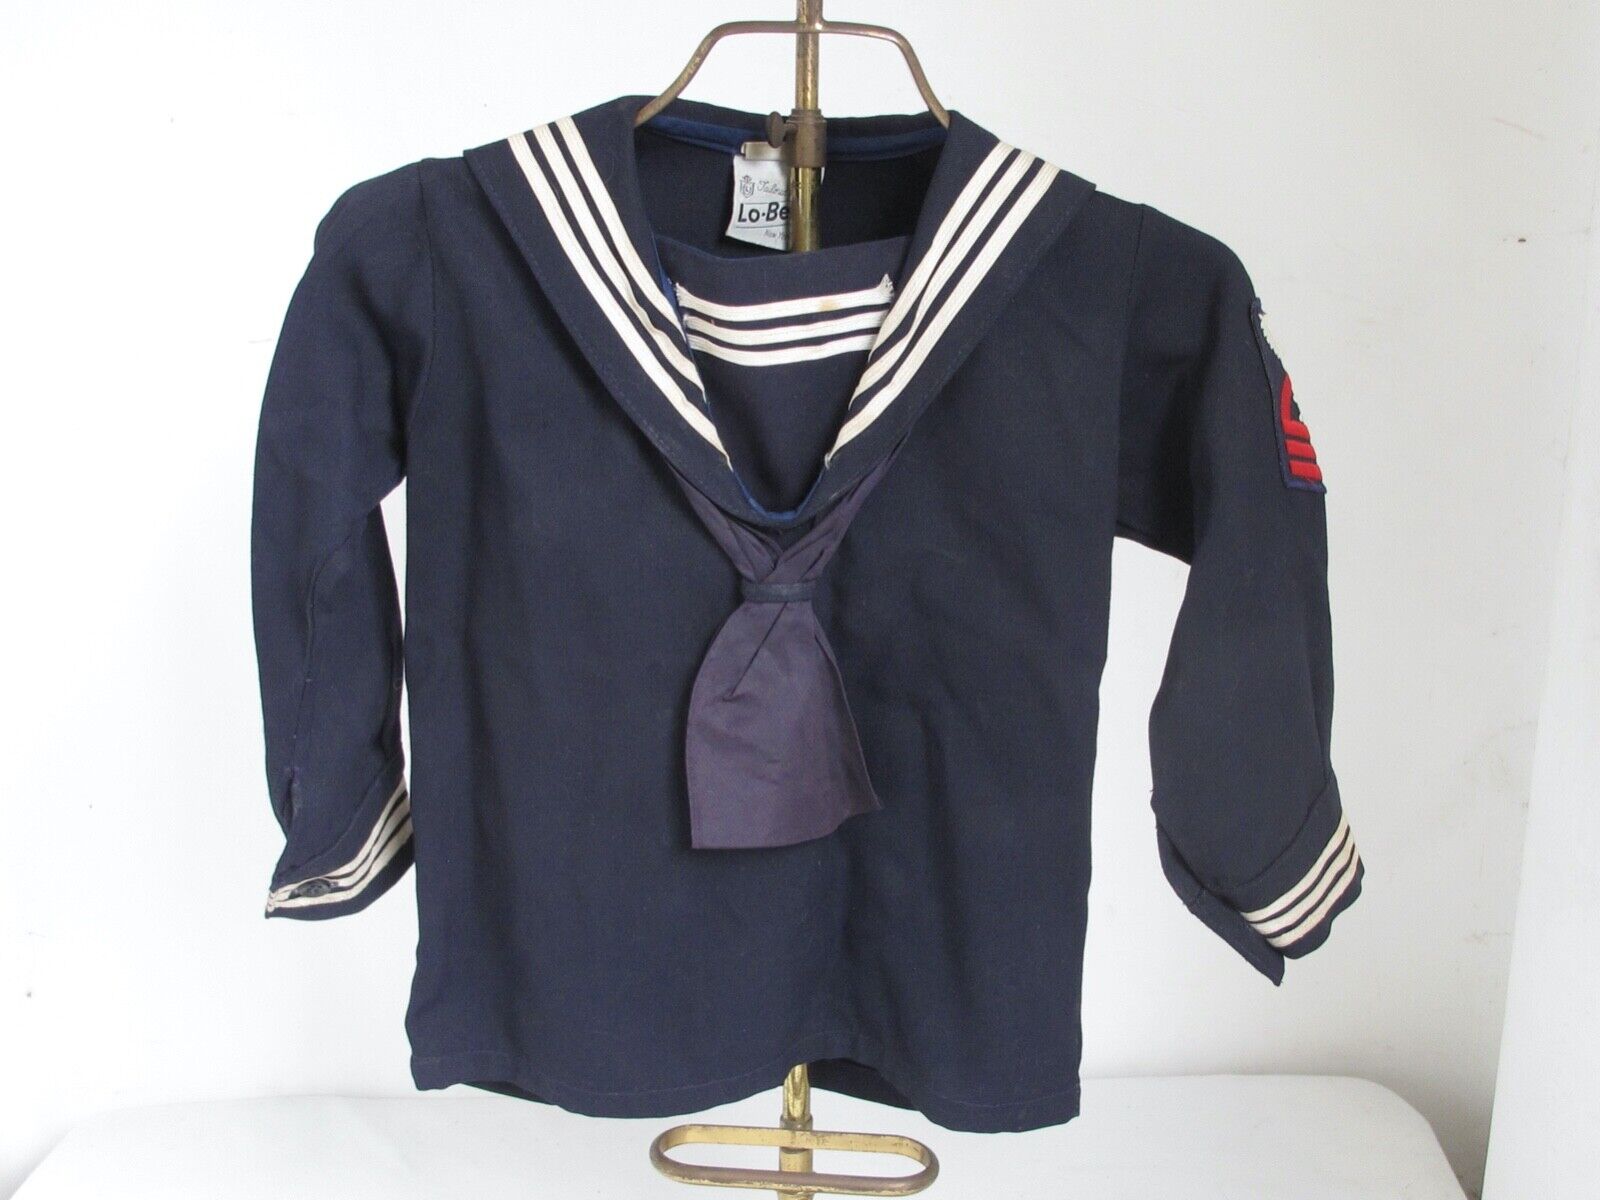 Vintage Childs Sailor Shirt By Lo-bel New York Navy Blue With White Trim Size 5